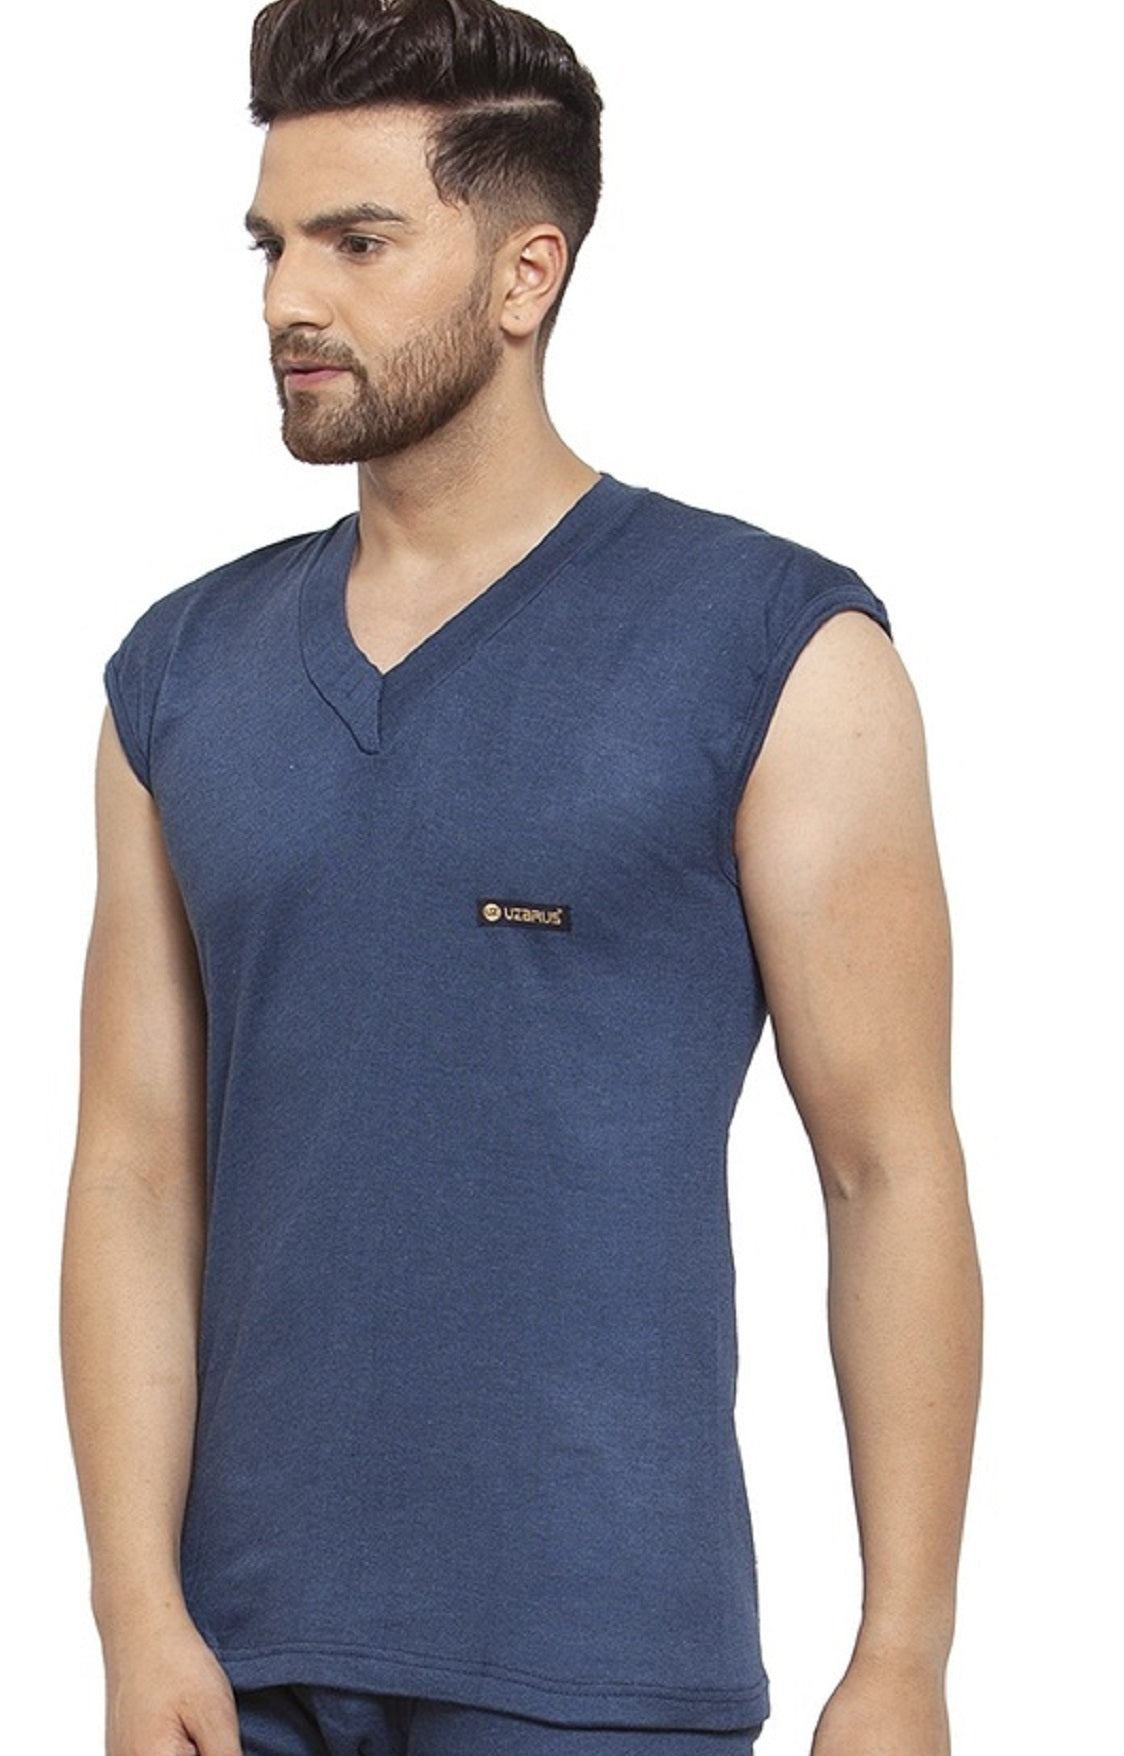 MEN'S SLEEVELESS SOLID V NECK THERMAL TOP